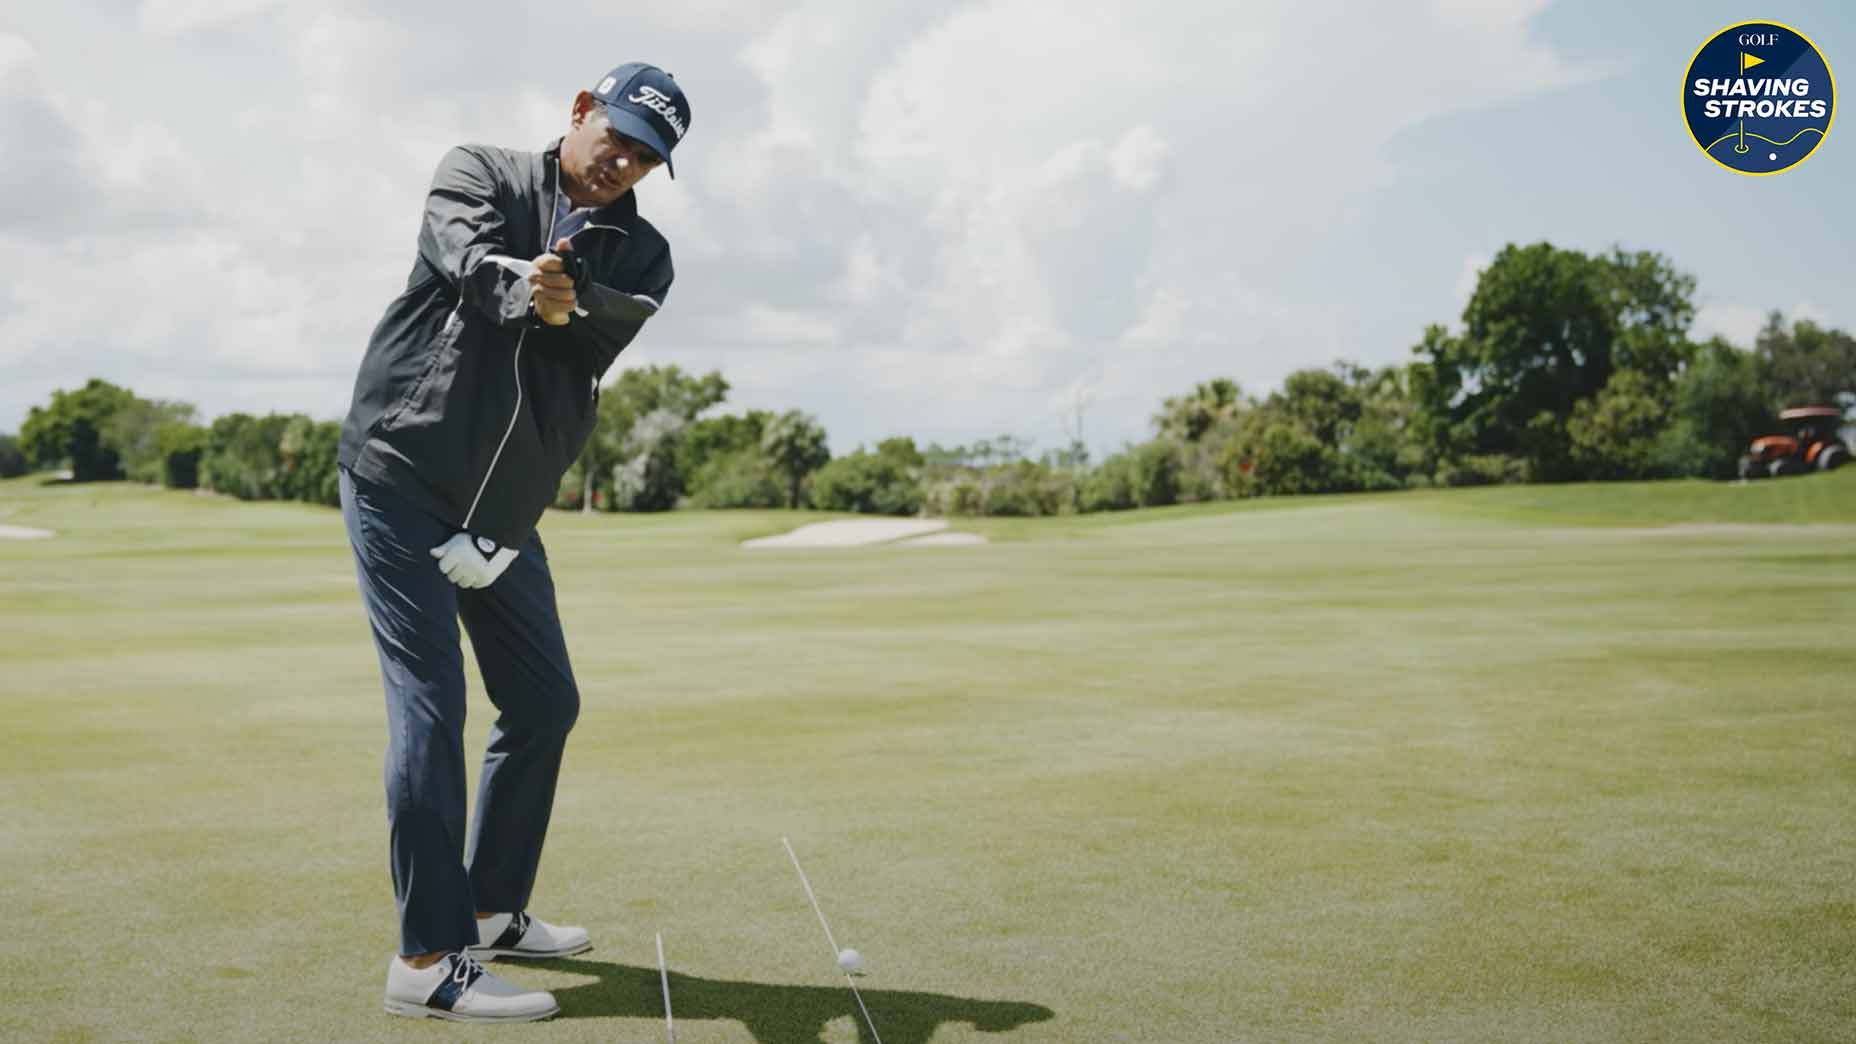 By increasing width in the golf swing, GOLF Top 100 Teacher Jason Baile says you can improve clubhead speed and see farther shots